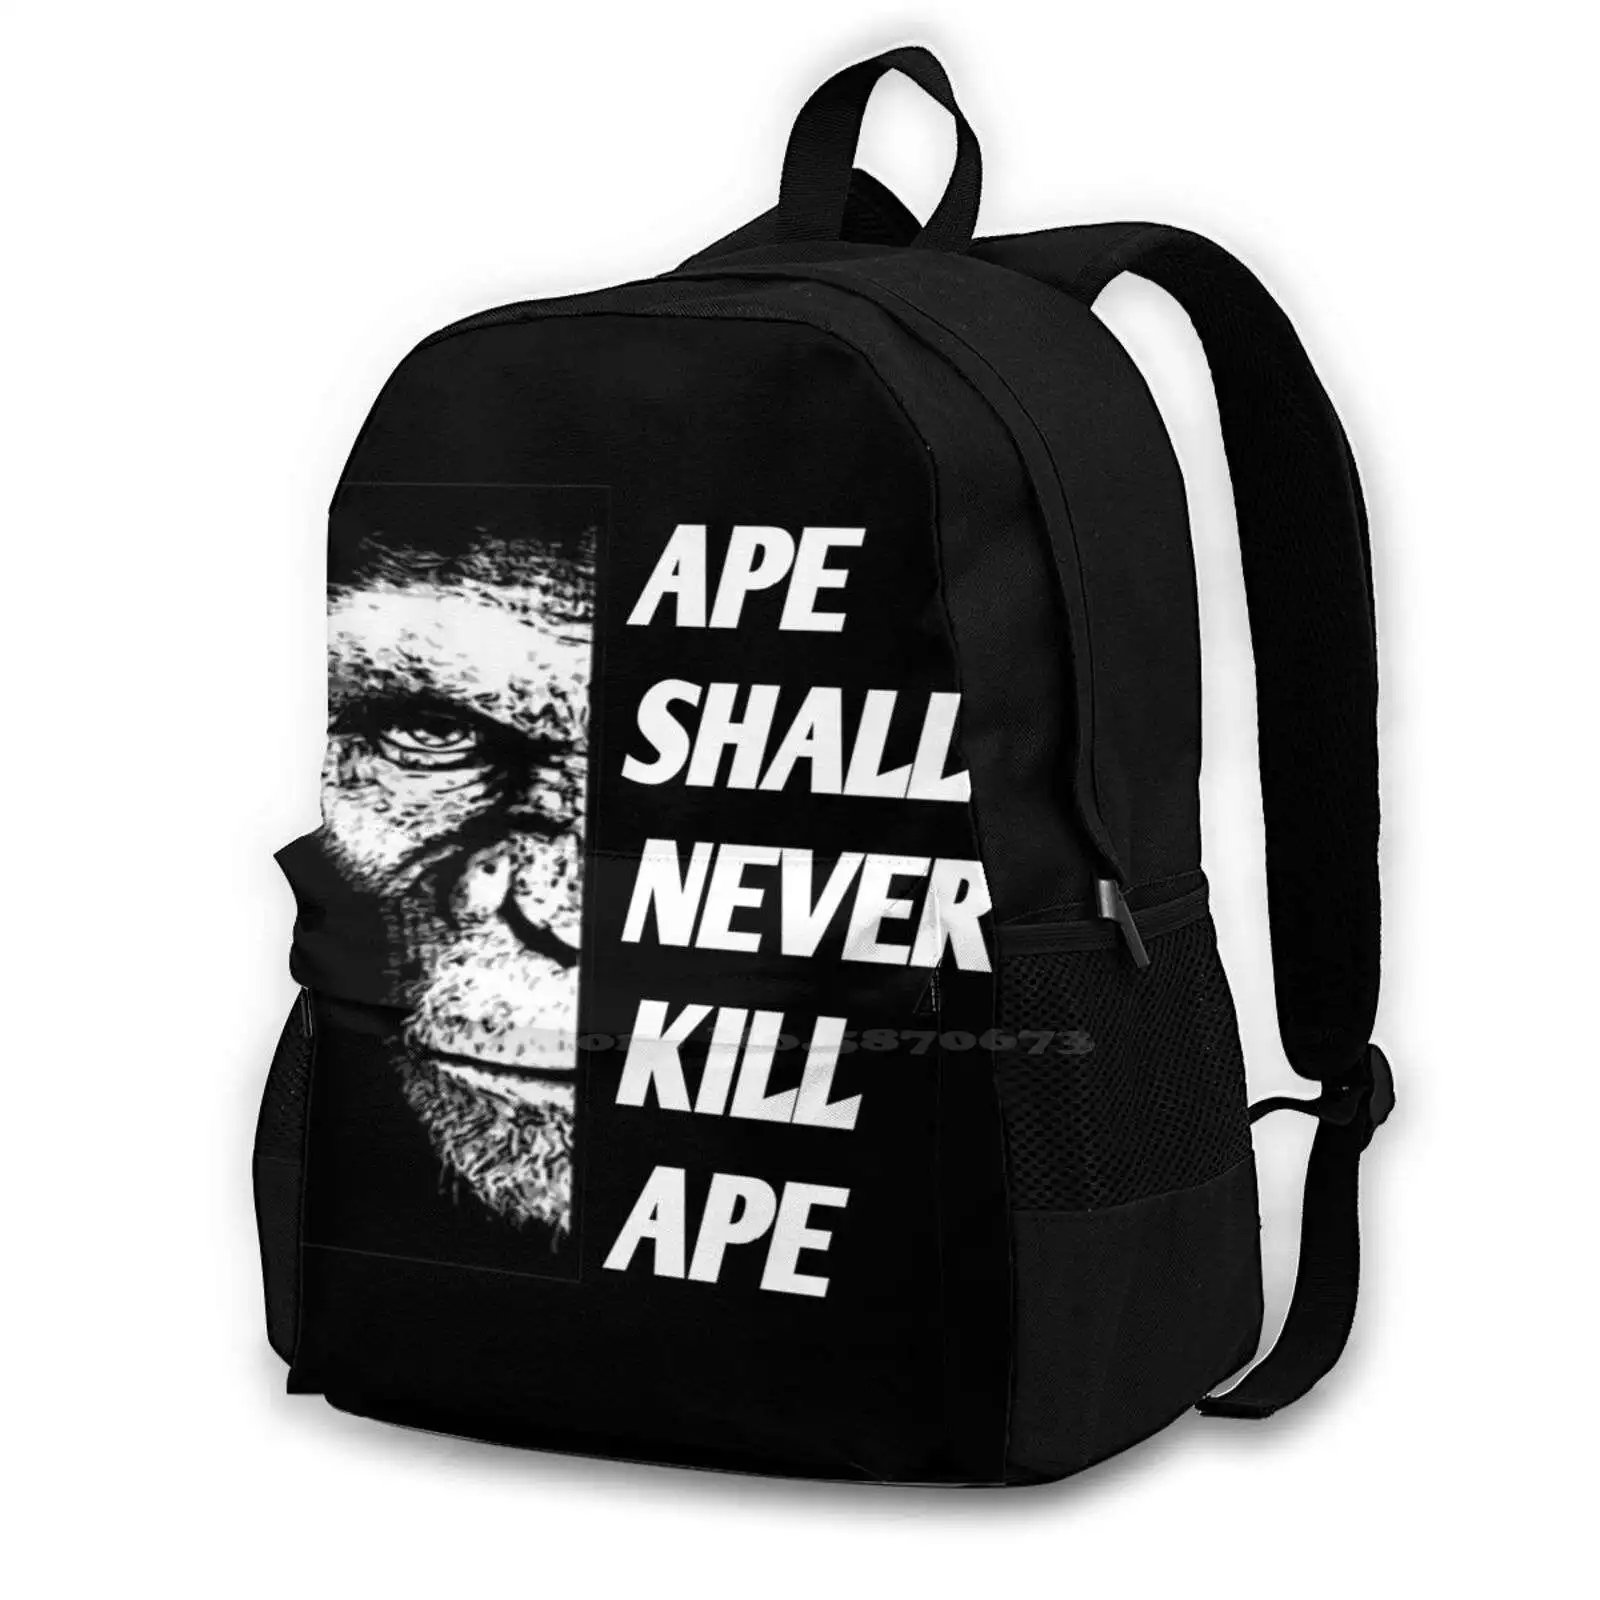 

Ape Shall Never Kill Ape School Bags For Teenage Girls Laptop Travel Bags Planet Of The Apes Rise Dawn Caesar Monkey Dawn Of